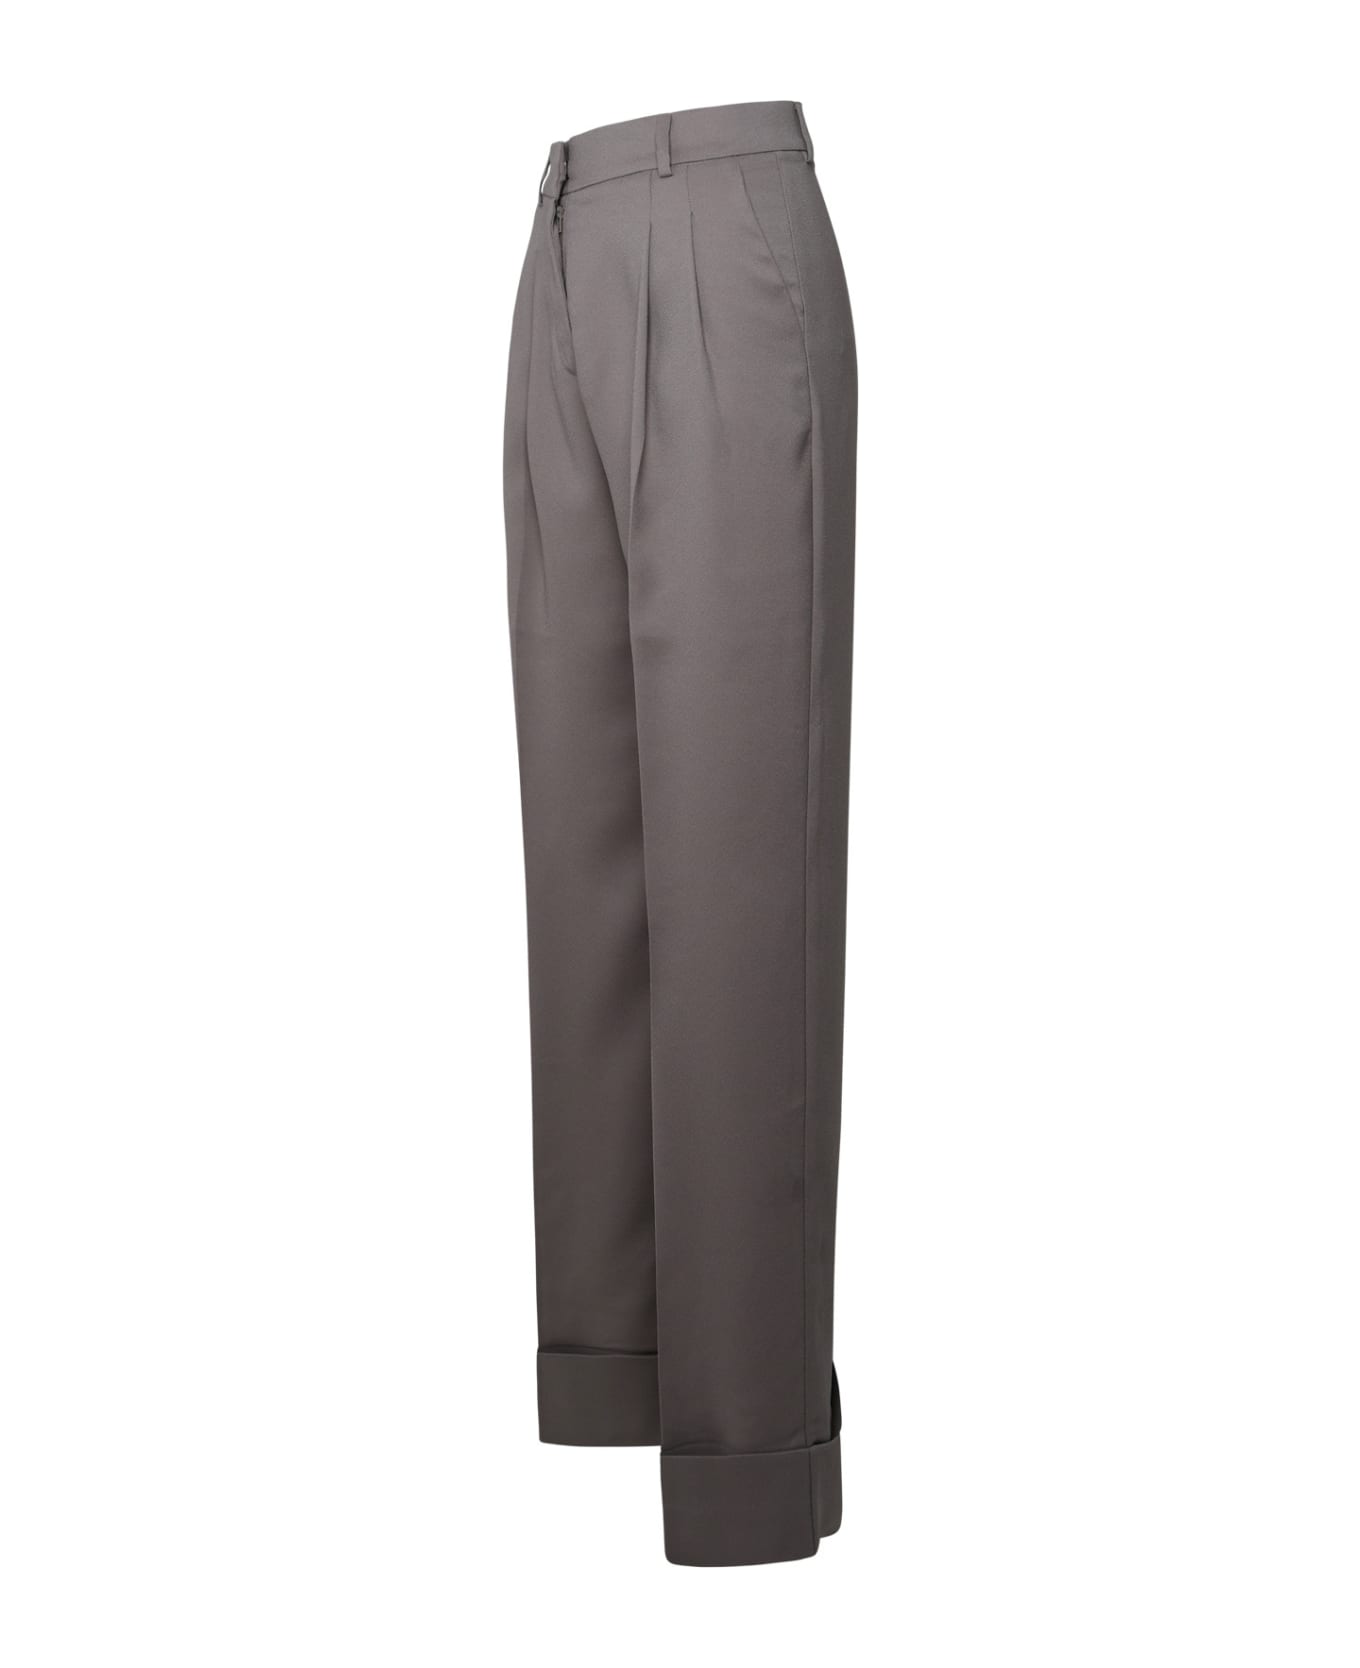 The Andamane Grey Polyester Trousers - Grey ボトムス